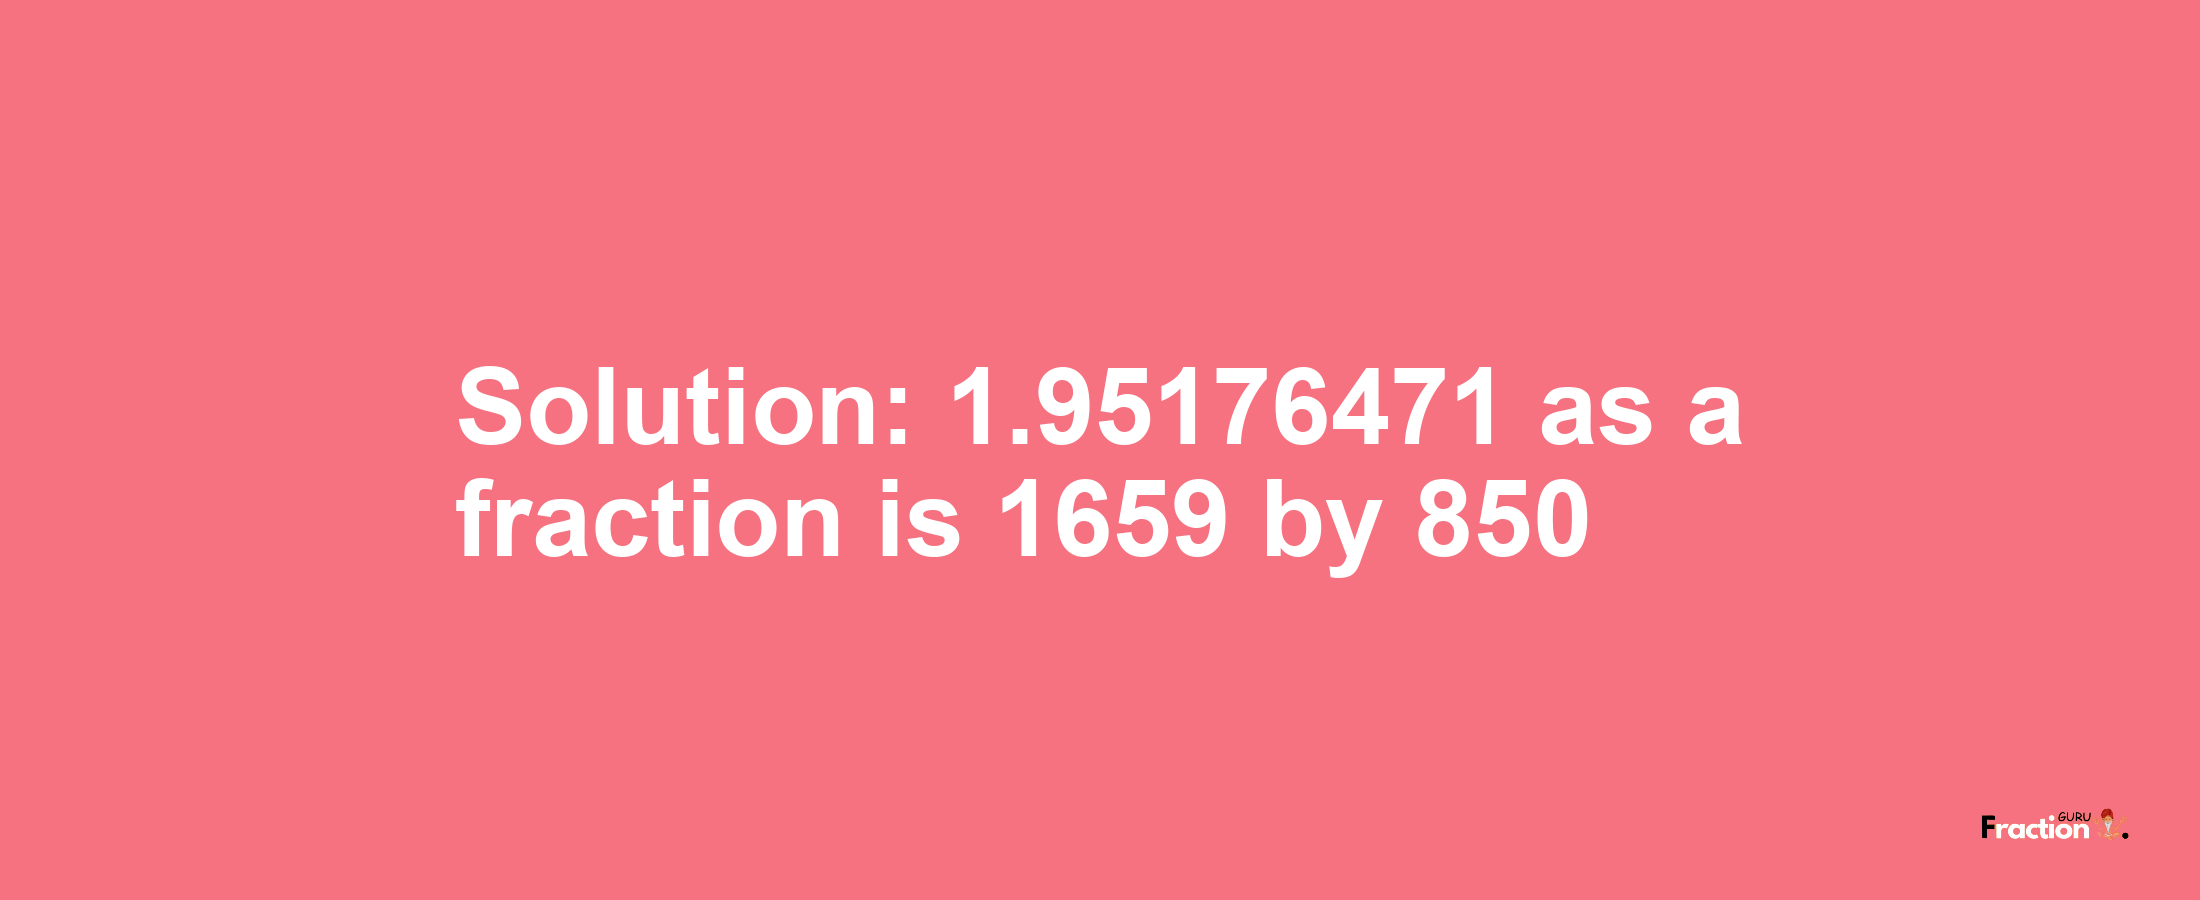 Solution:1.95176471 as a fraction is 1659/850